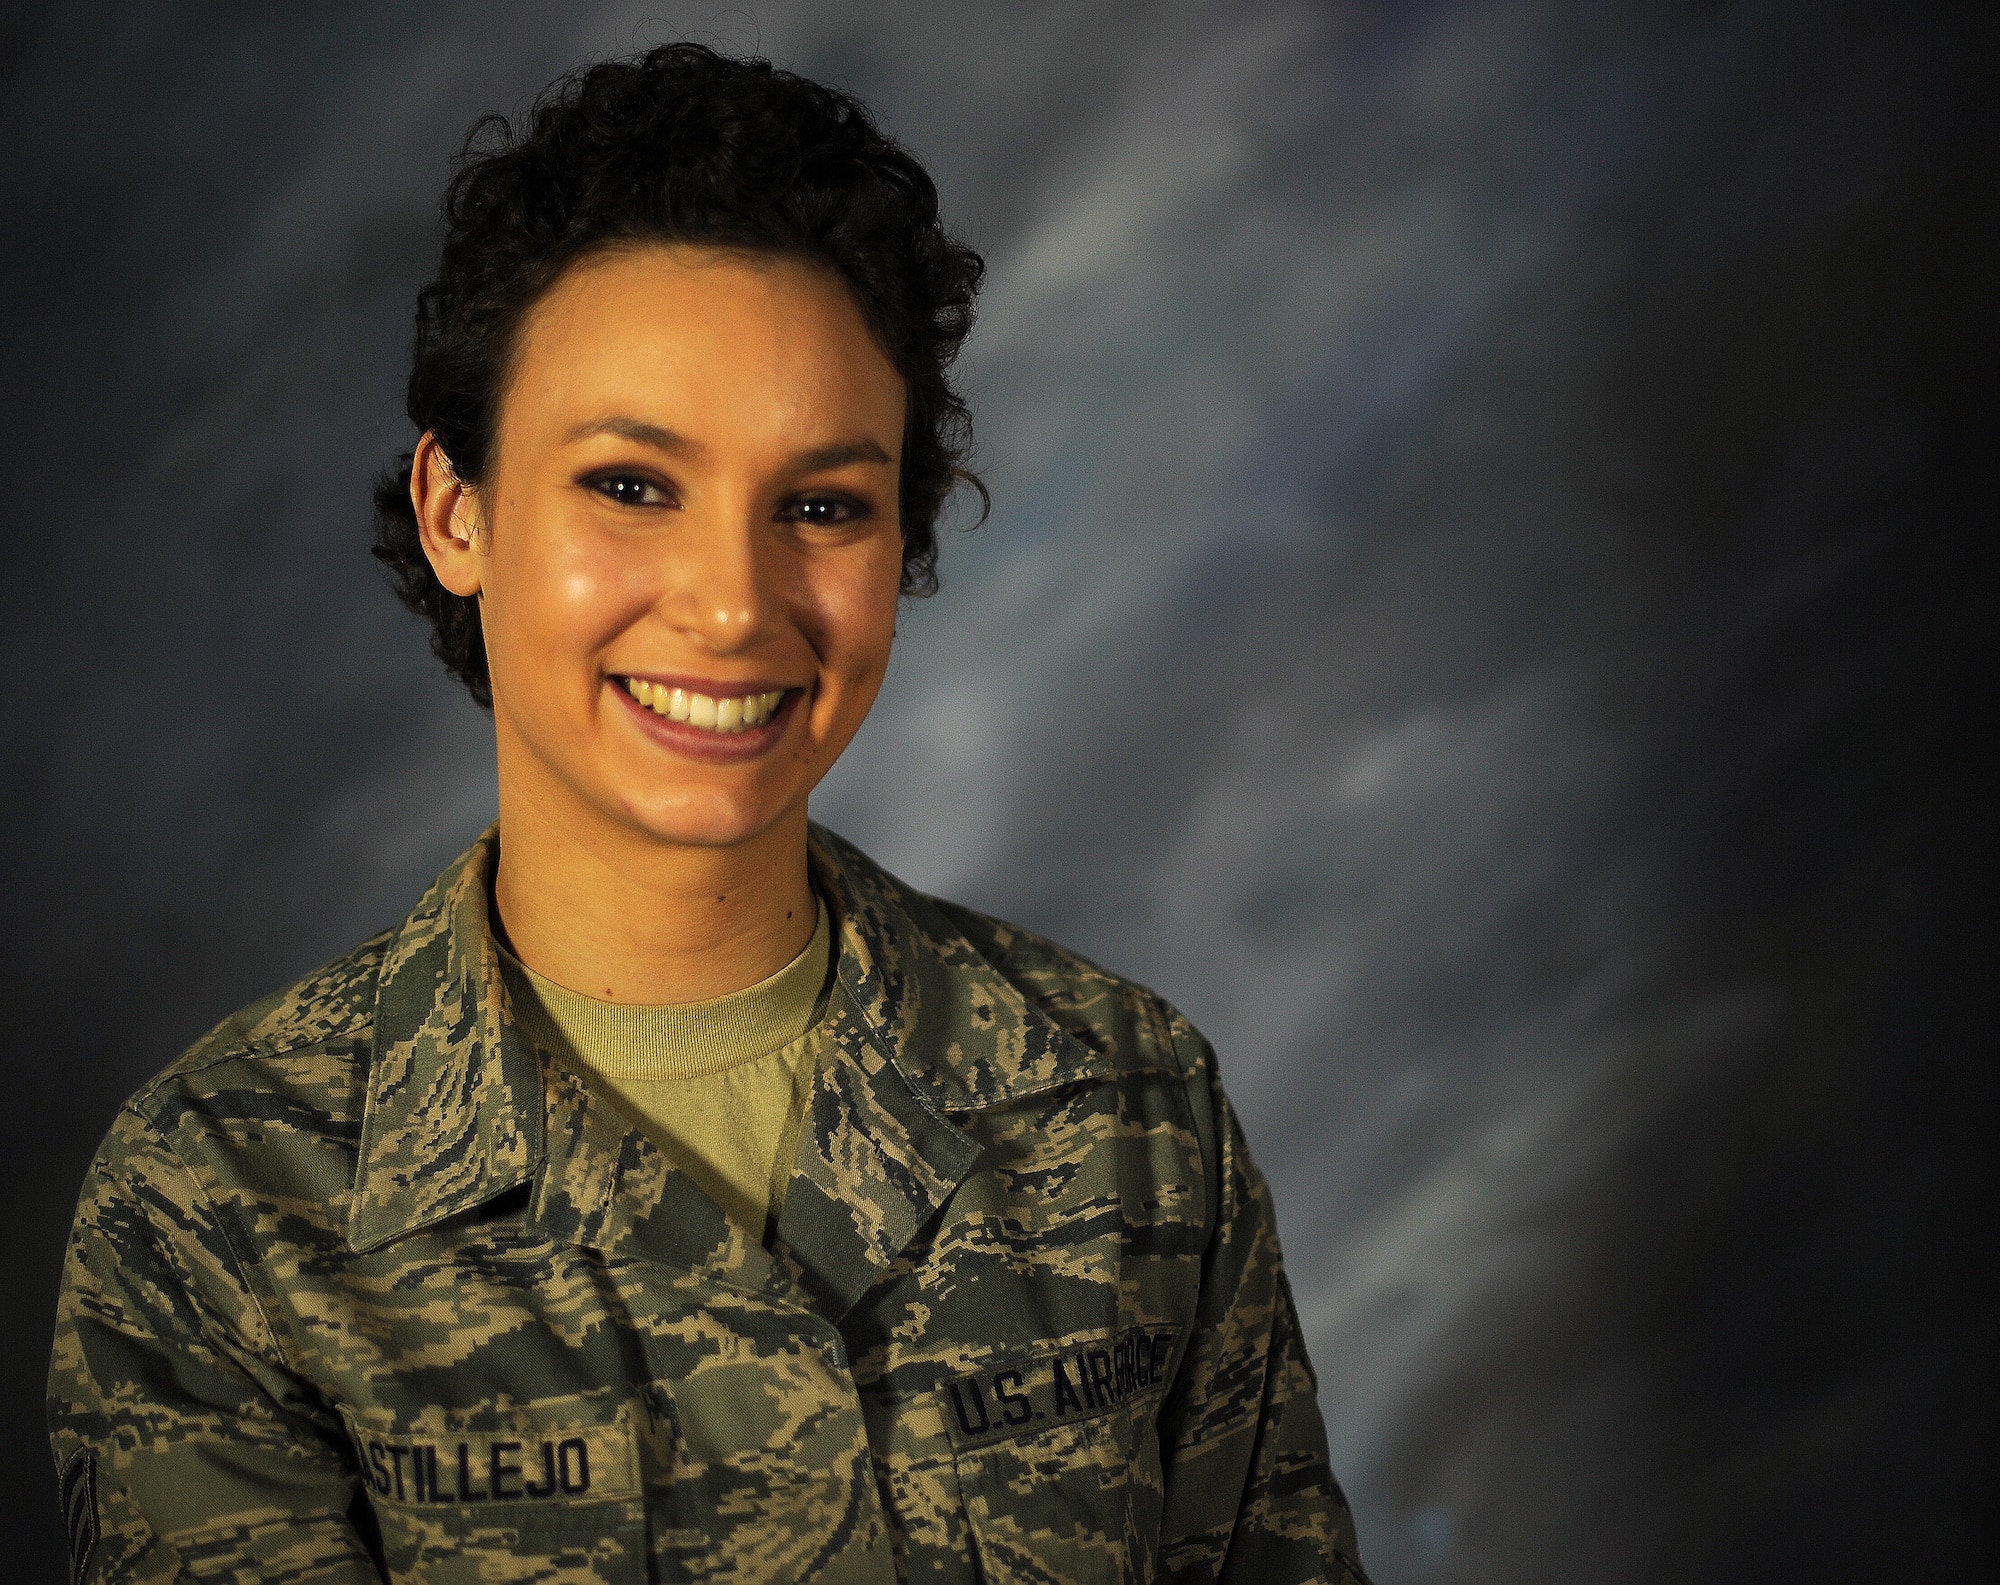 Senior Airman Myiah Castillejo, 348th Reconnaissance Squadron, was diagnosed with stage three Hodgkin’s lymphoma in January 2014. After spending months in chemotherapy and radiation treatment, she was declared cancer free in January 2015. She now spends her time training for her job and lifting weights at the gym. (U.S. Air Force photo/Airman 1st Class Bonnie Grantham/Released)